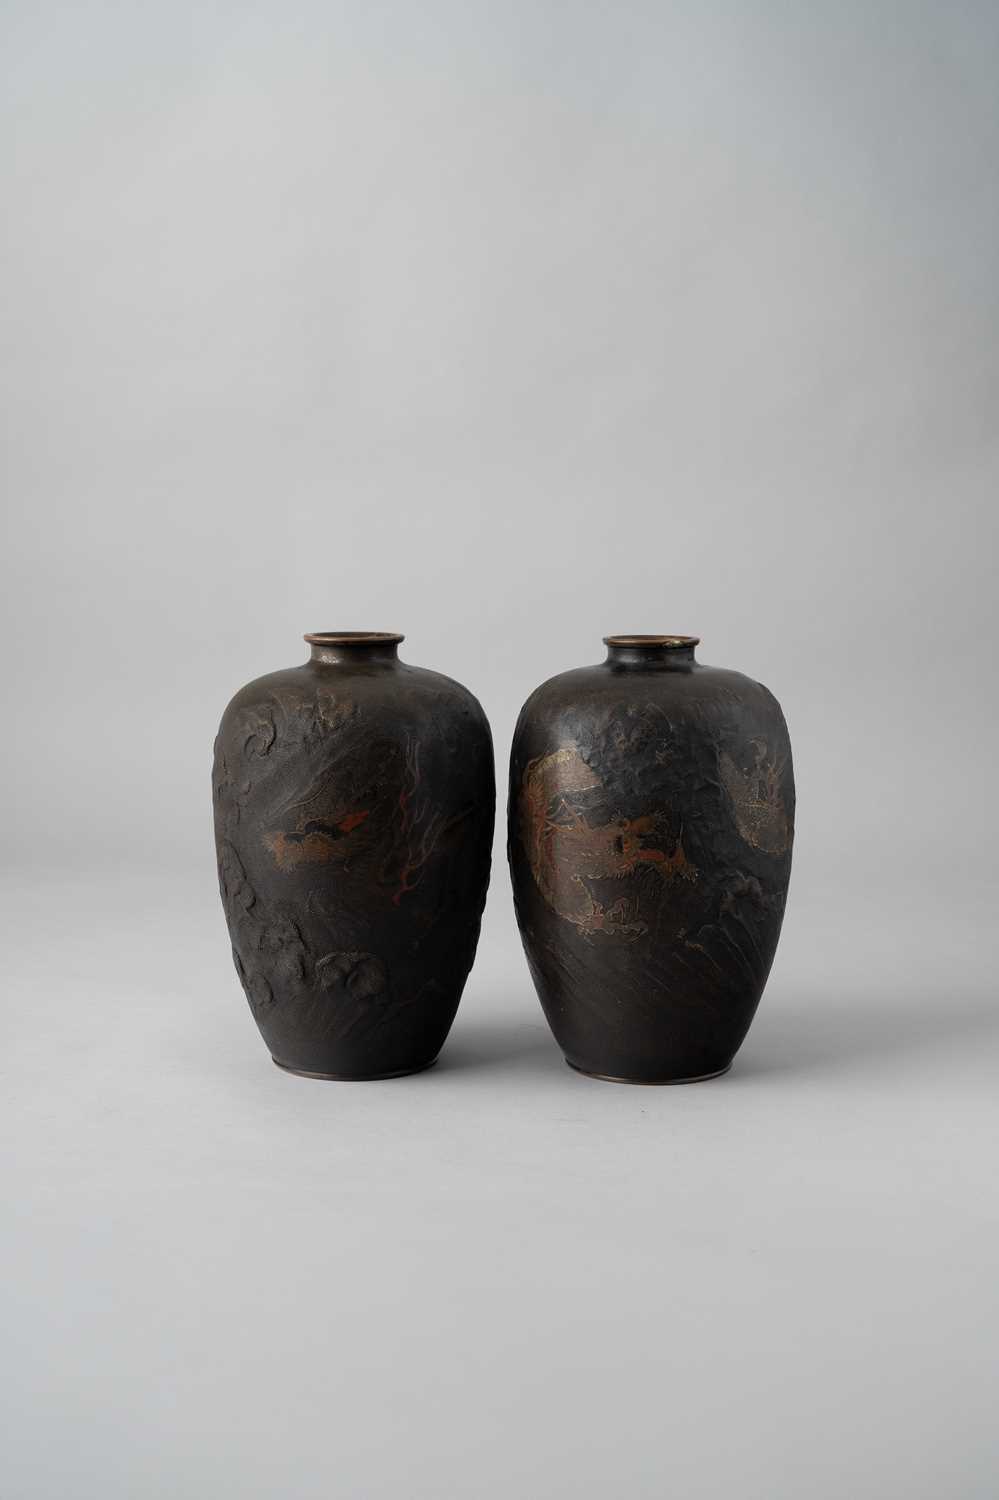 A PAIR OF JAPANESE BRONZE DRAGON VASES MEIJI ERA, 19TH/20TH CENTURY Each decorated with a writhing